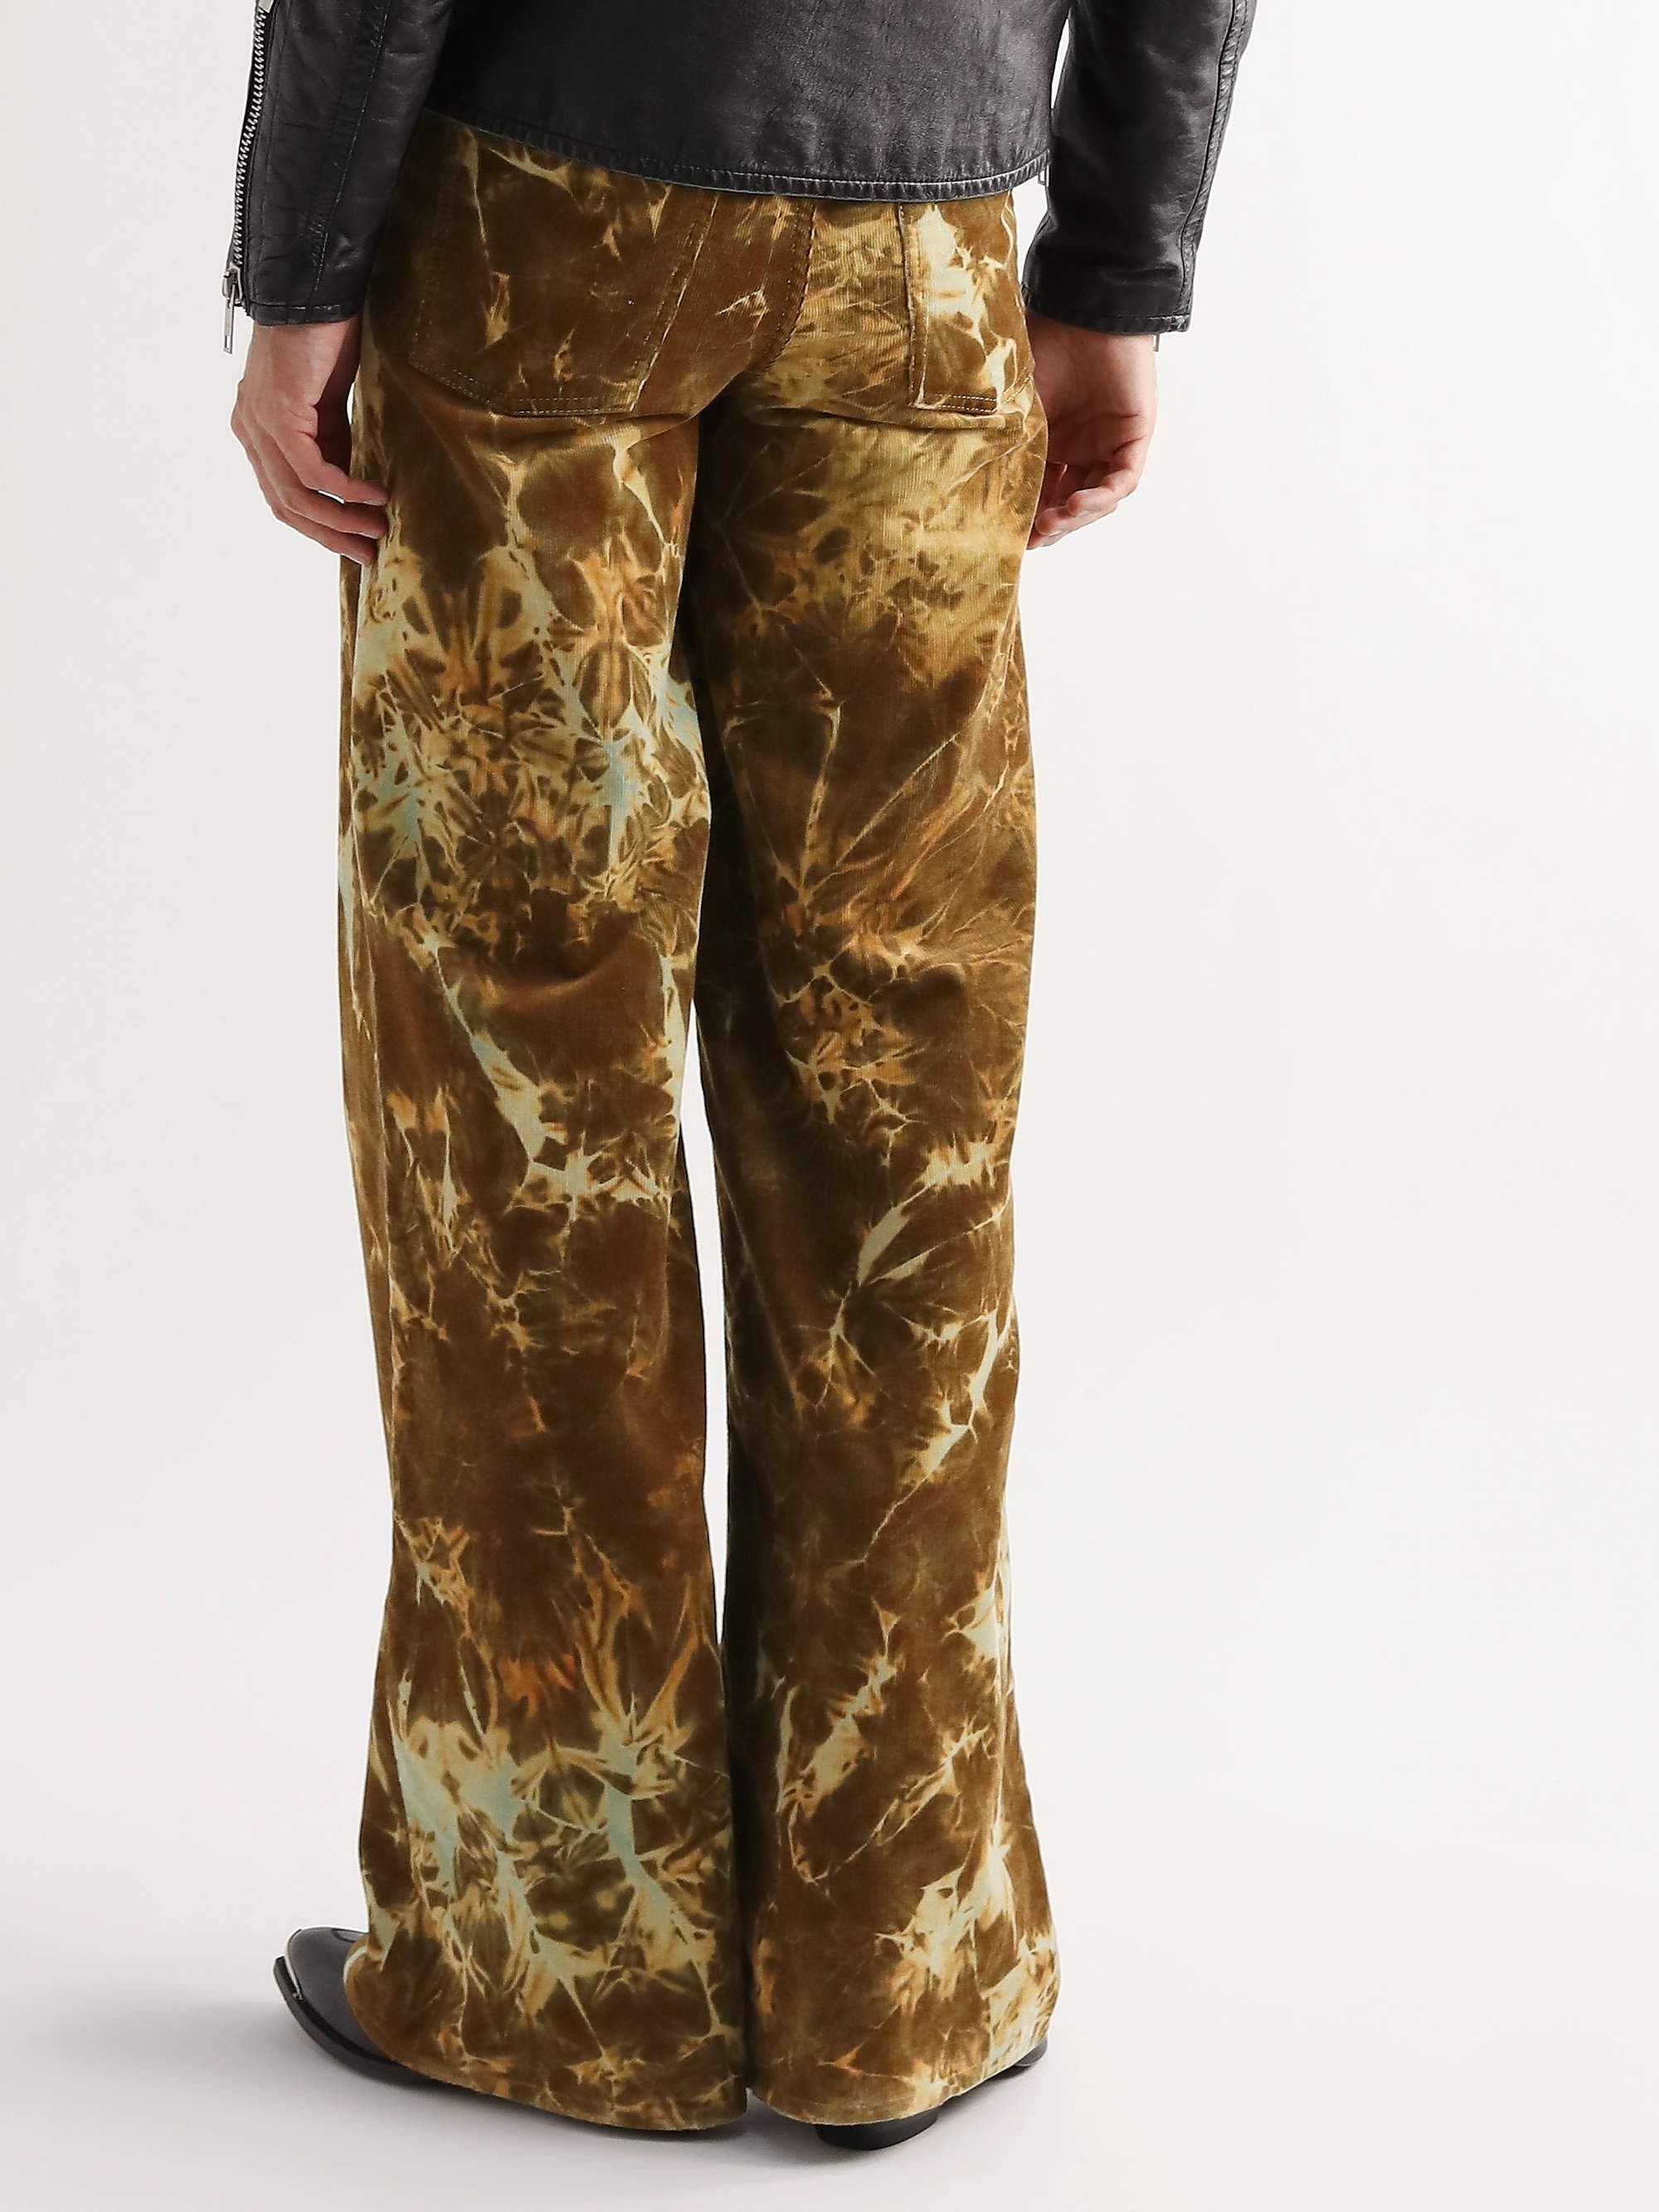 CELINE HOMME Flared Tie-Dyed Jeans